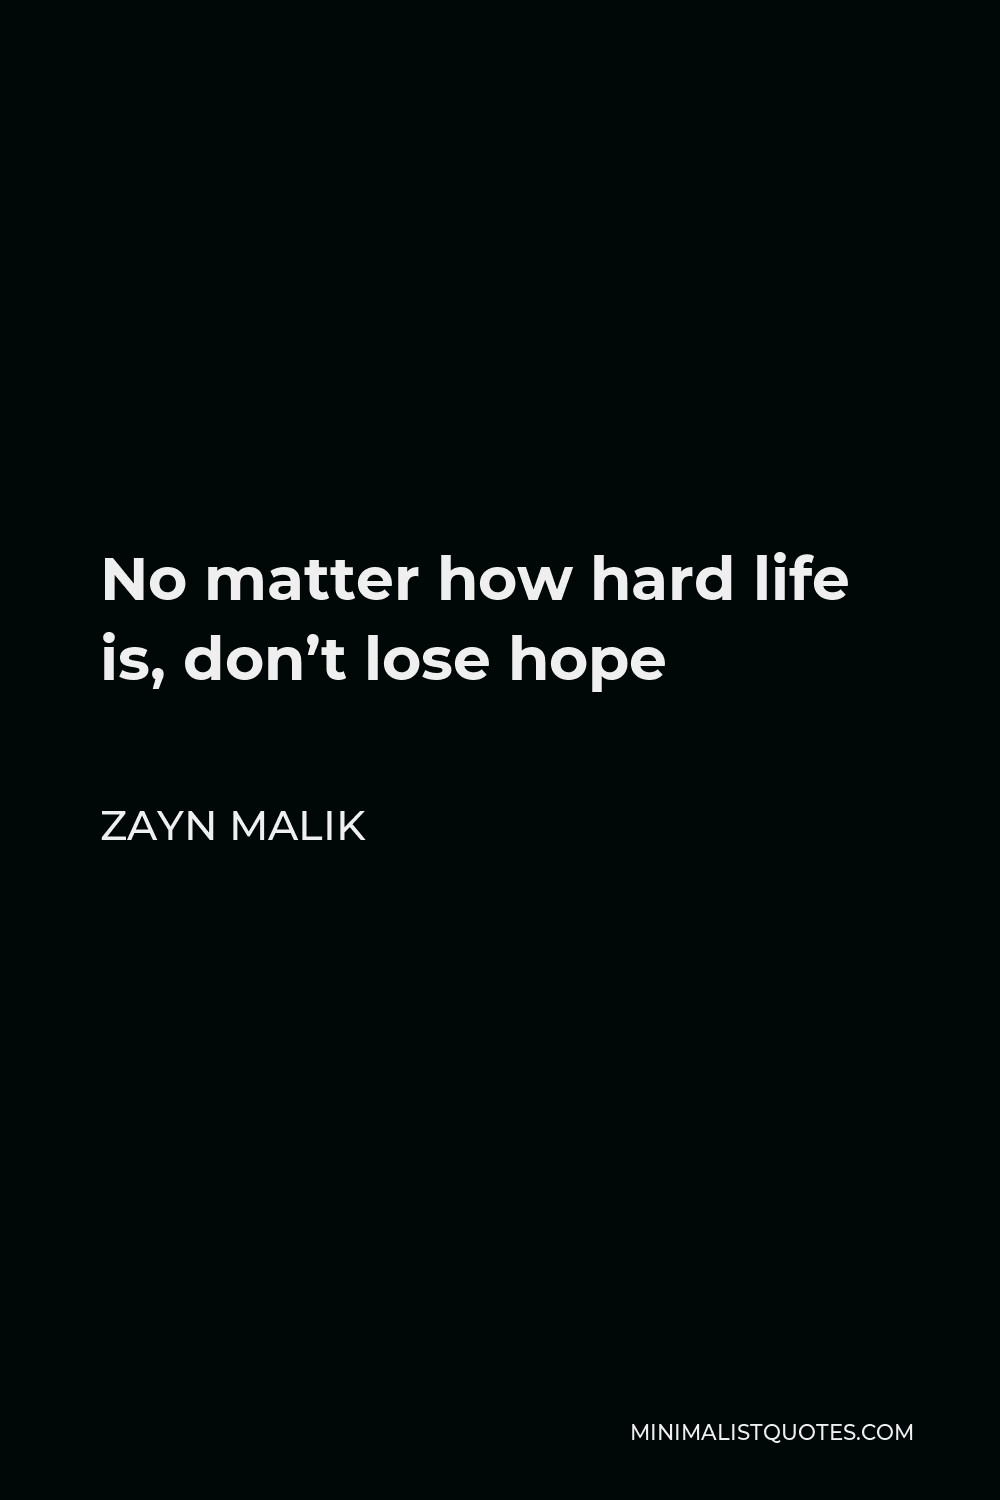 Zayn Malik Quote: No matter how hard life is, don't lose hope